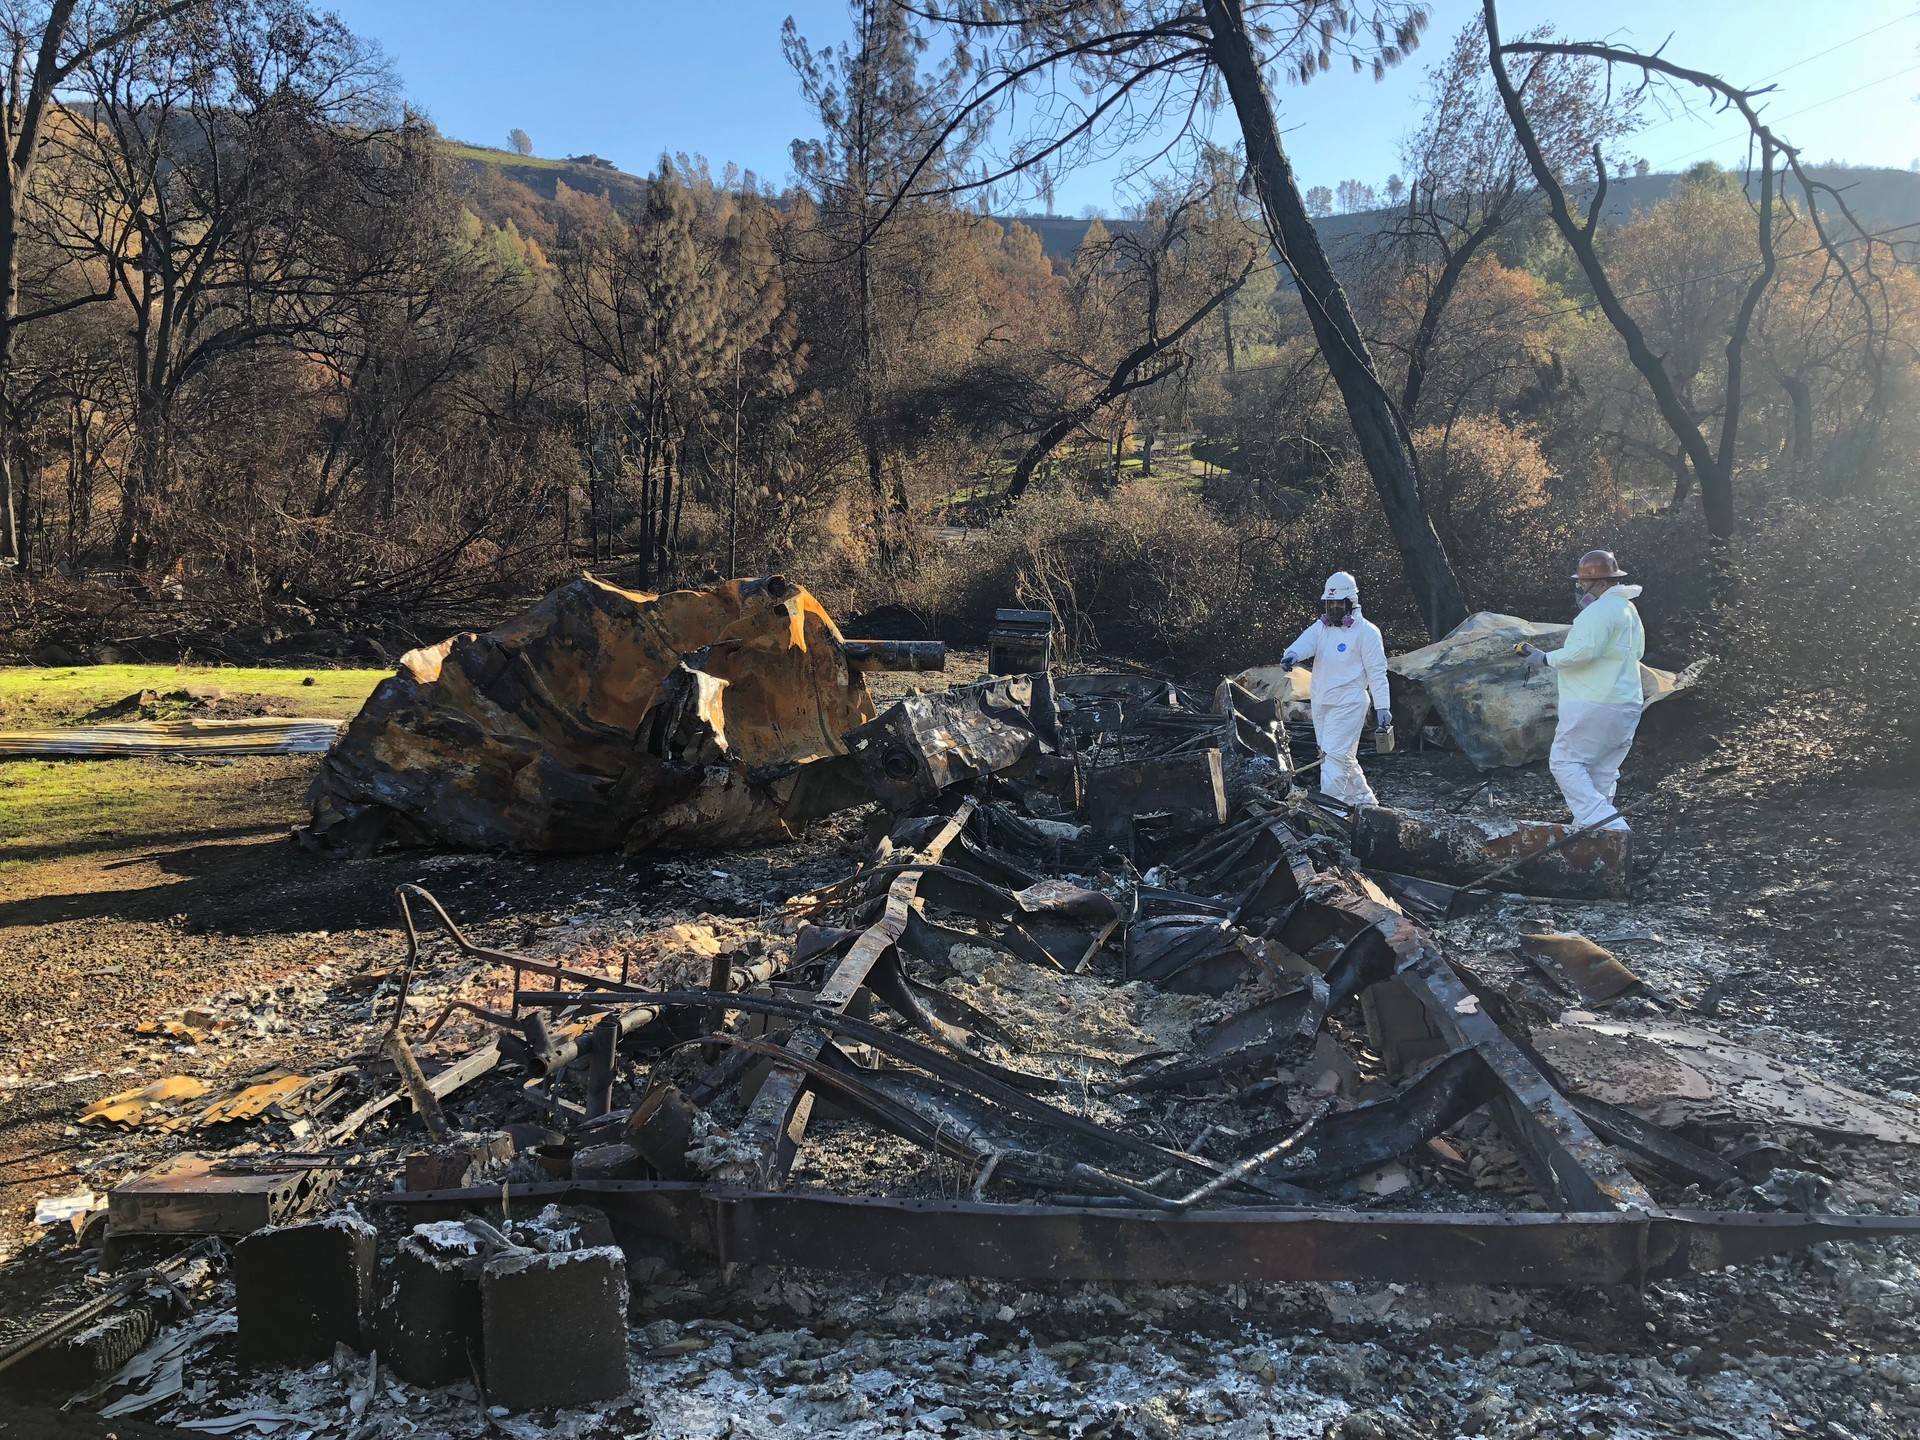 EPA workers use a radiation detector and multi-gas meter to search for hazardous waste in a mobile home destroyed by the Camp Fire. Sonja Hutson/KQED